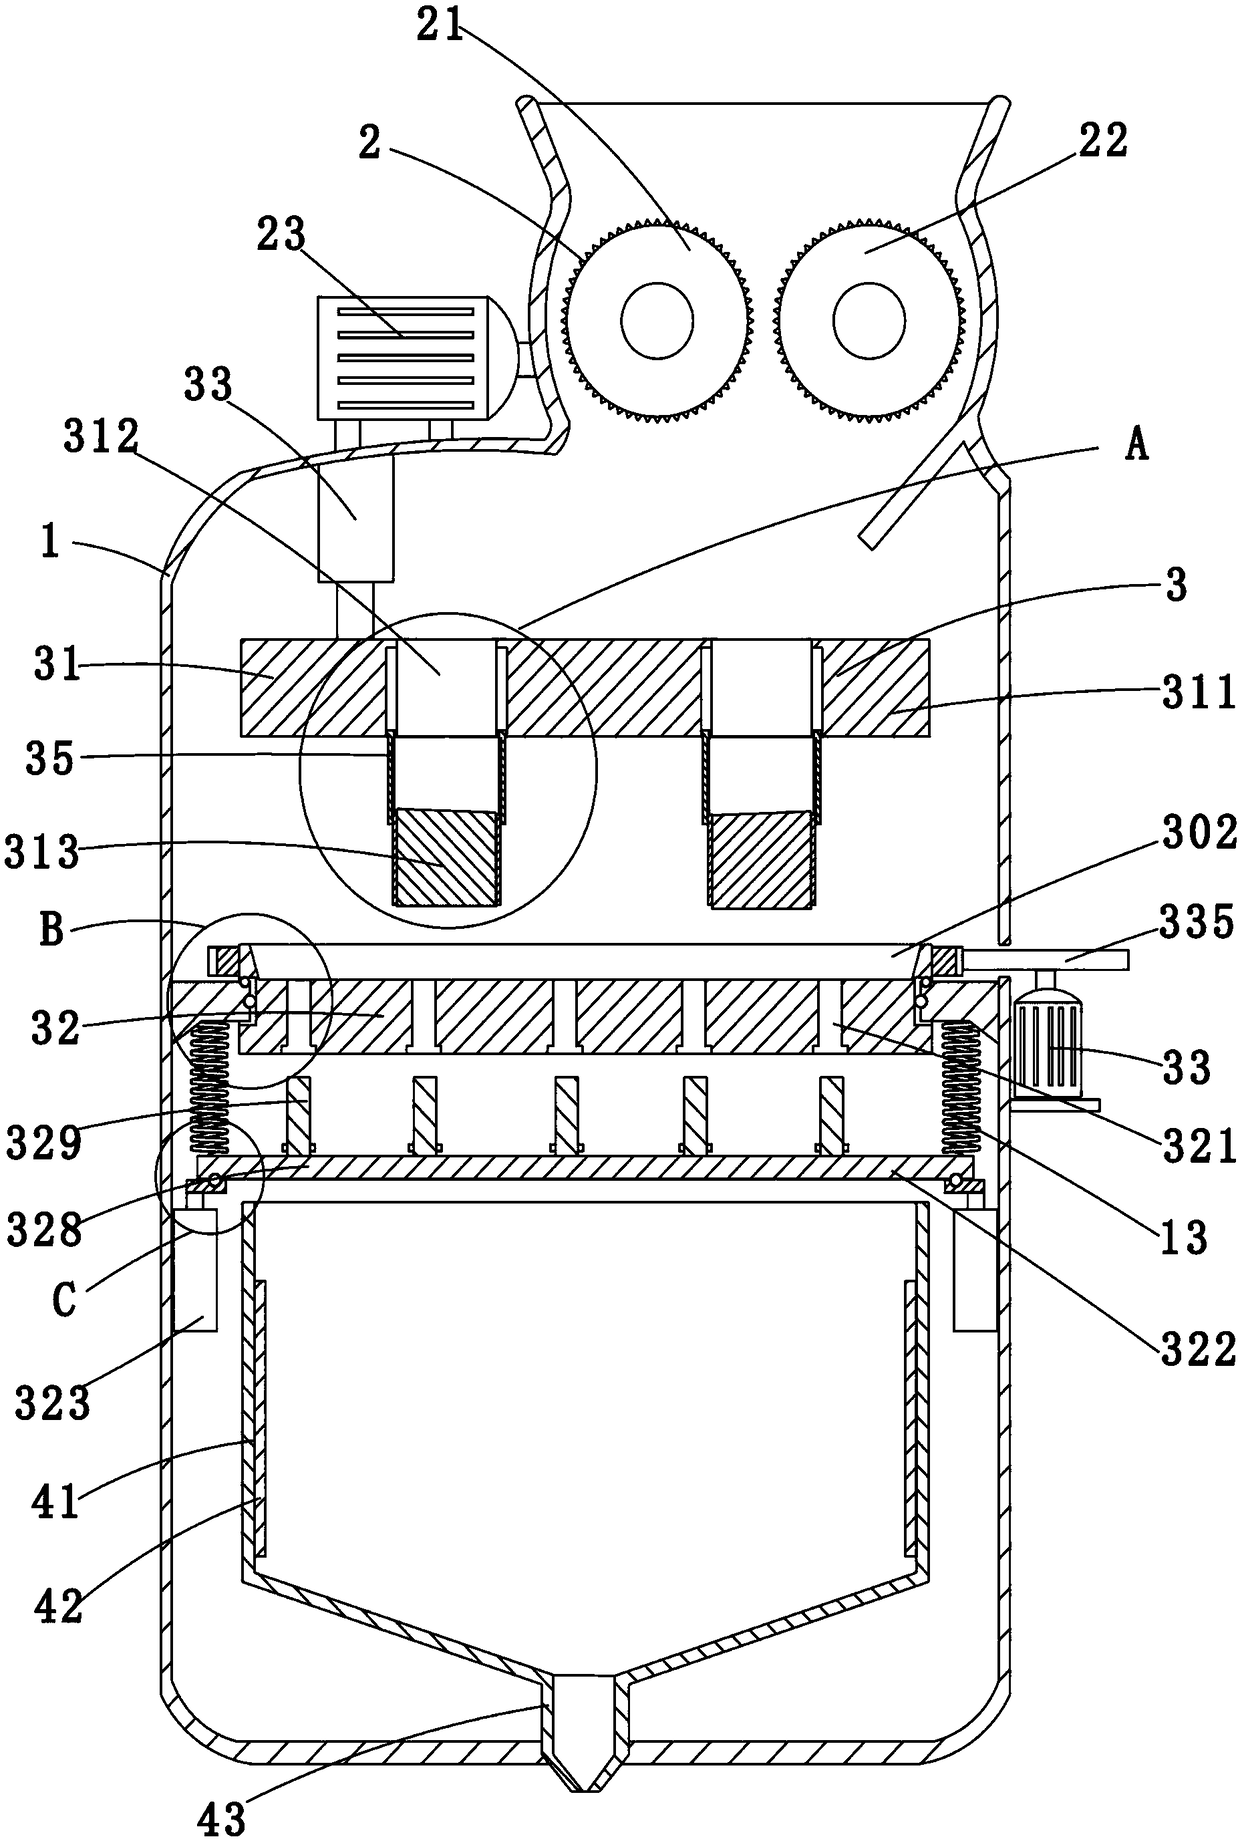 Waste plastic crushing and reprocessing apparatus